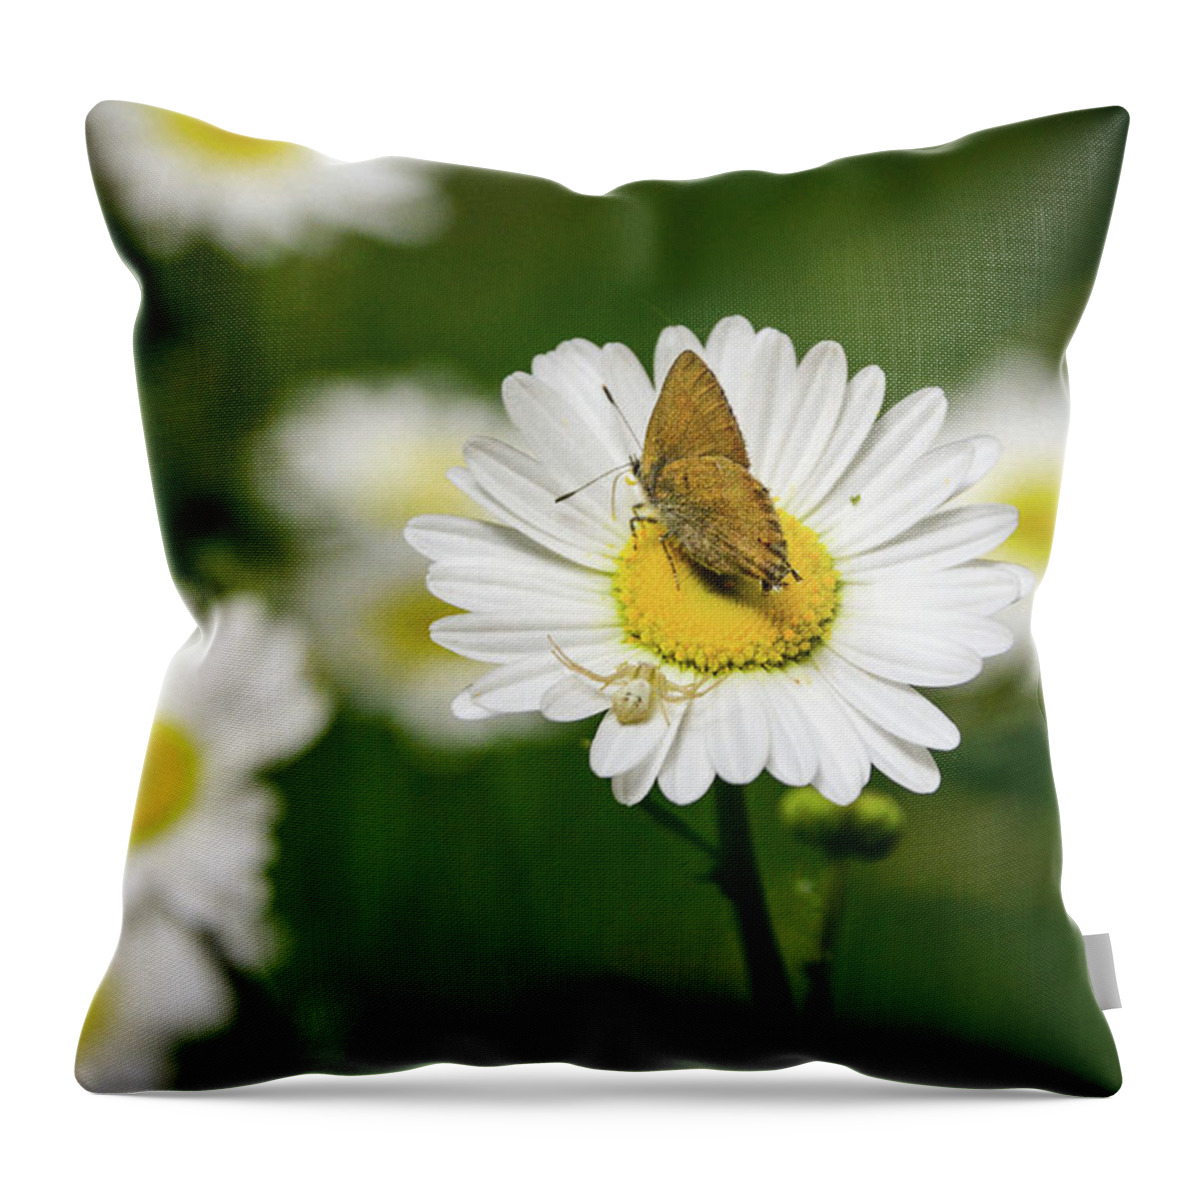 Moth Throw Pillow featuring the photograph Moth Meets Spider by Steph Gabler